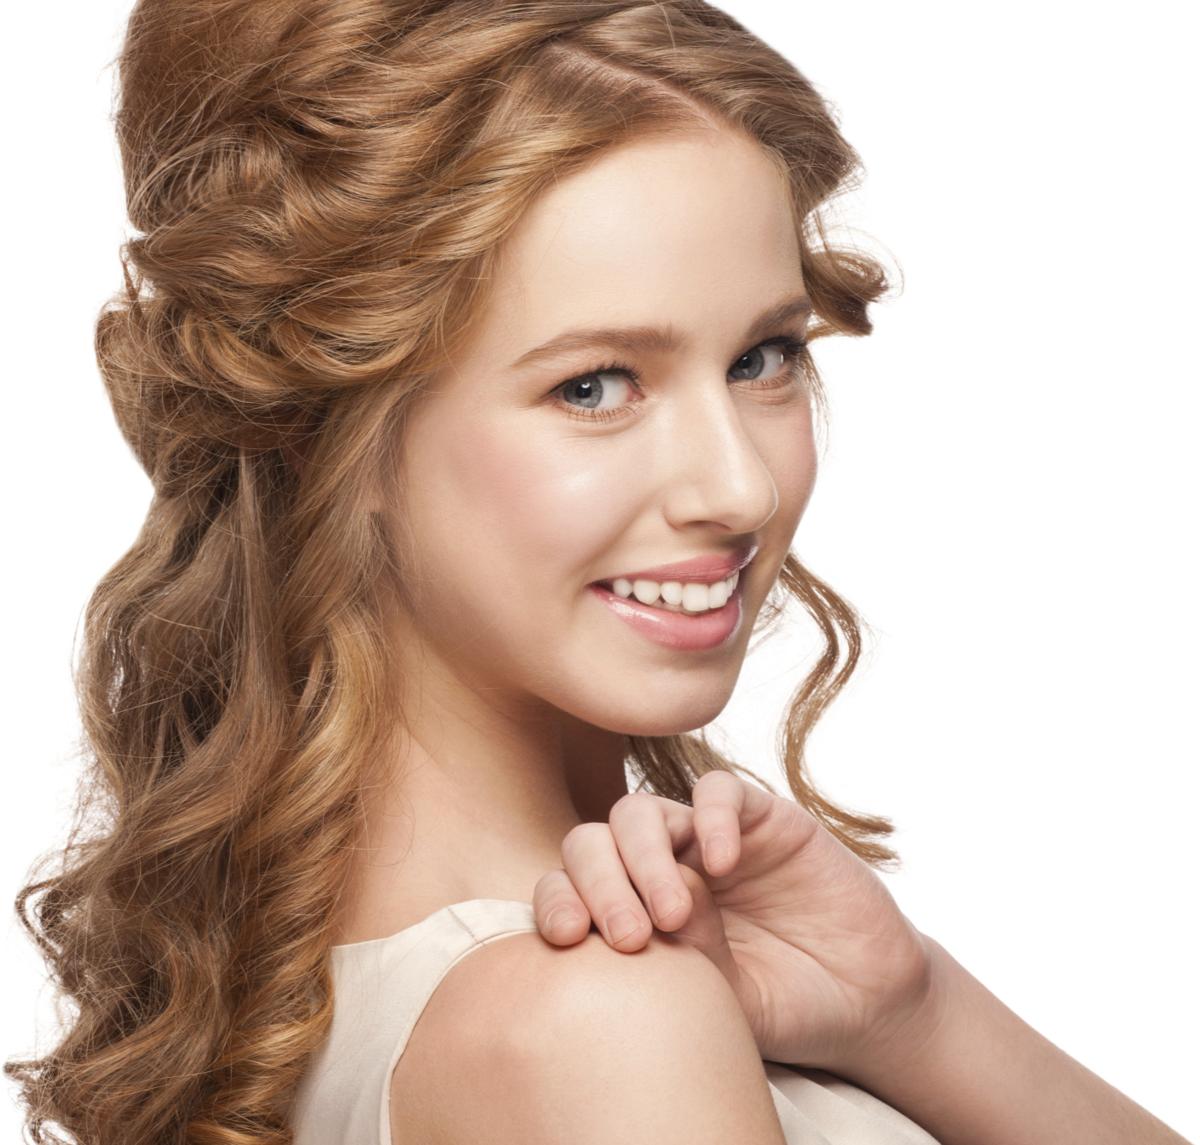 Cool and Quirky Hairstyles for Naturally Curly Hair